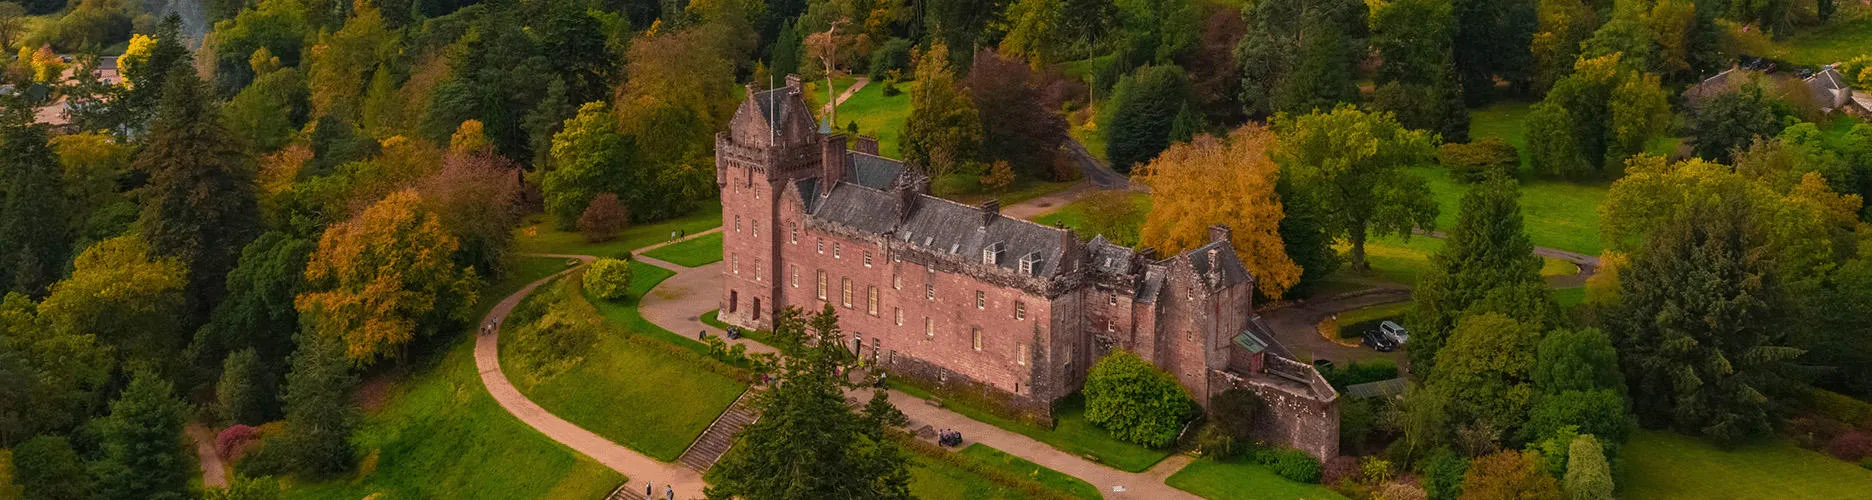 Brodick castle ariel view surrounded in woodland